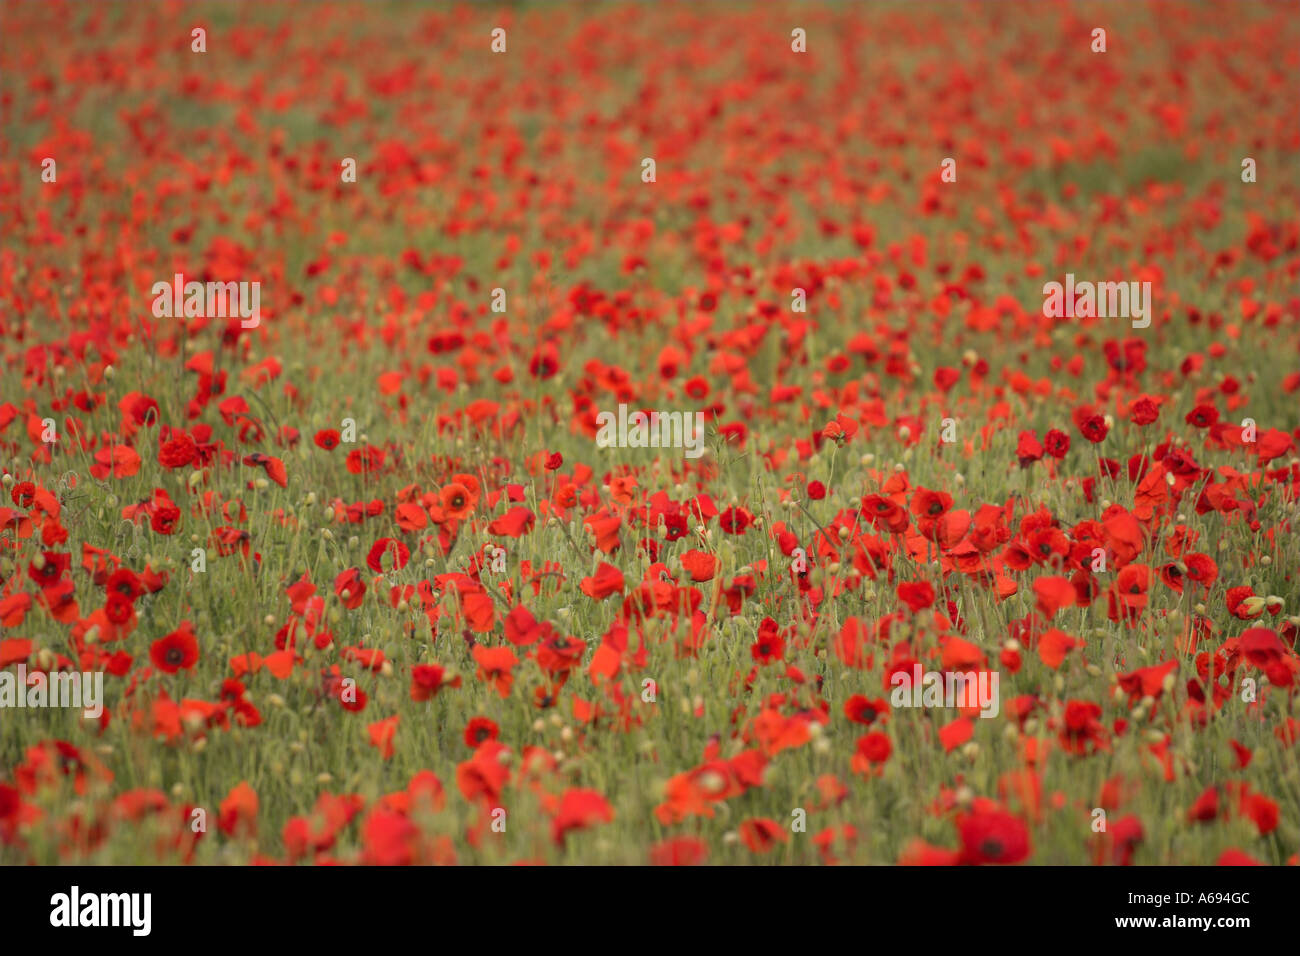 Poppies [Papaver rhoeas], field full of colourful red poppy flowers, England, UK Stock Photo